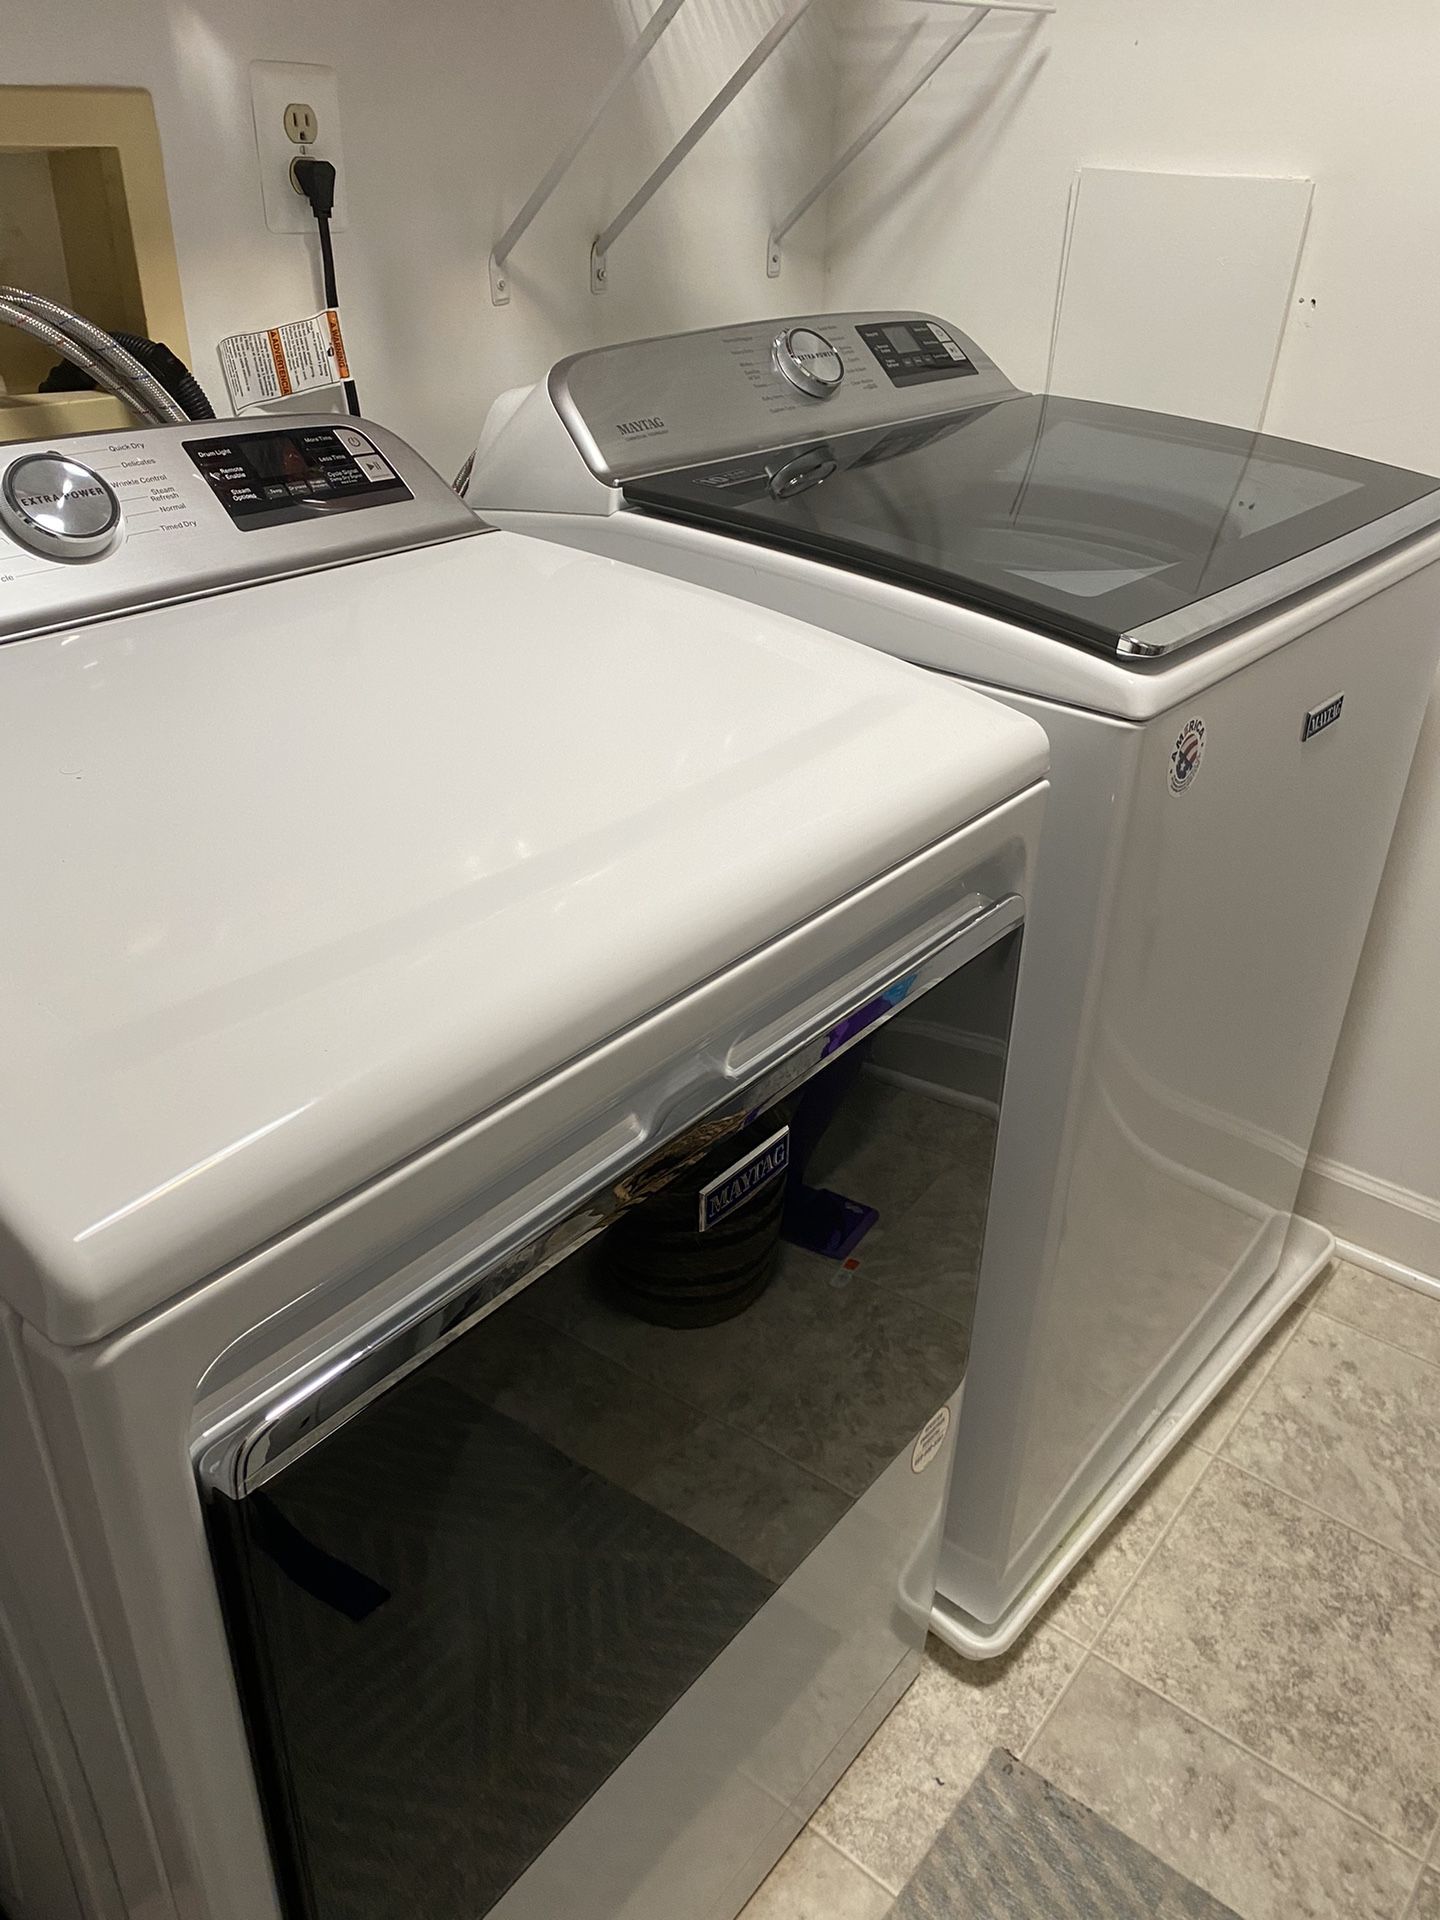 Maytag Smart Capable Electric Washer And Dryer